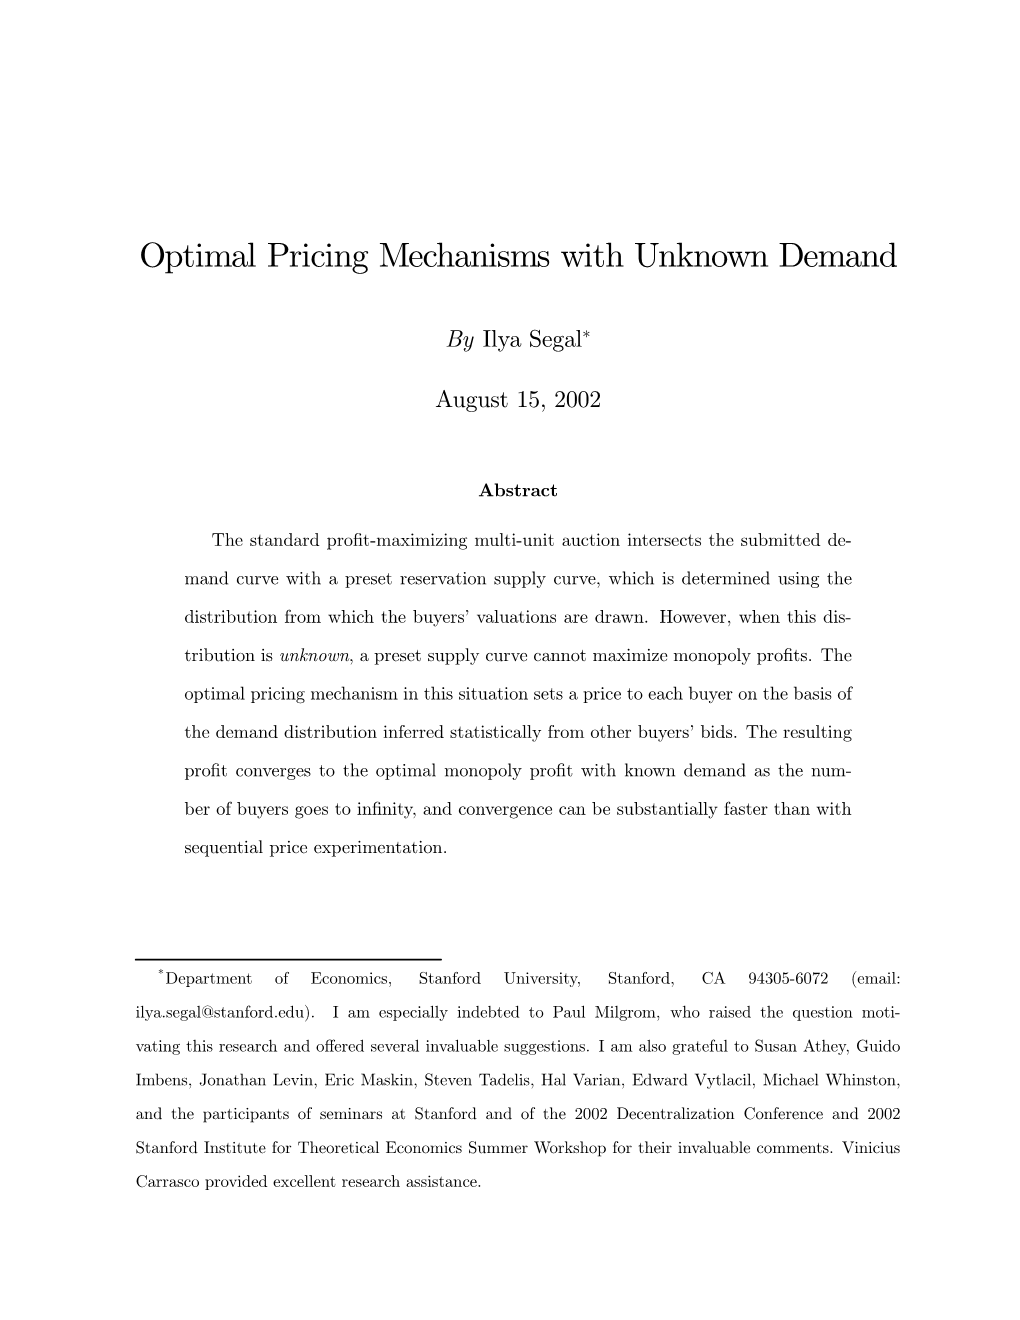 Optimal Pricing Mechanisms with Unknown Demand